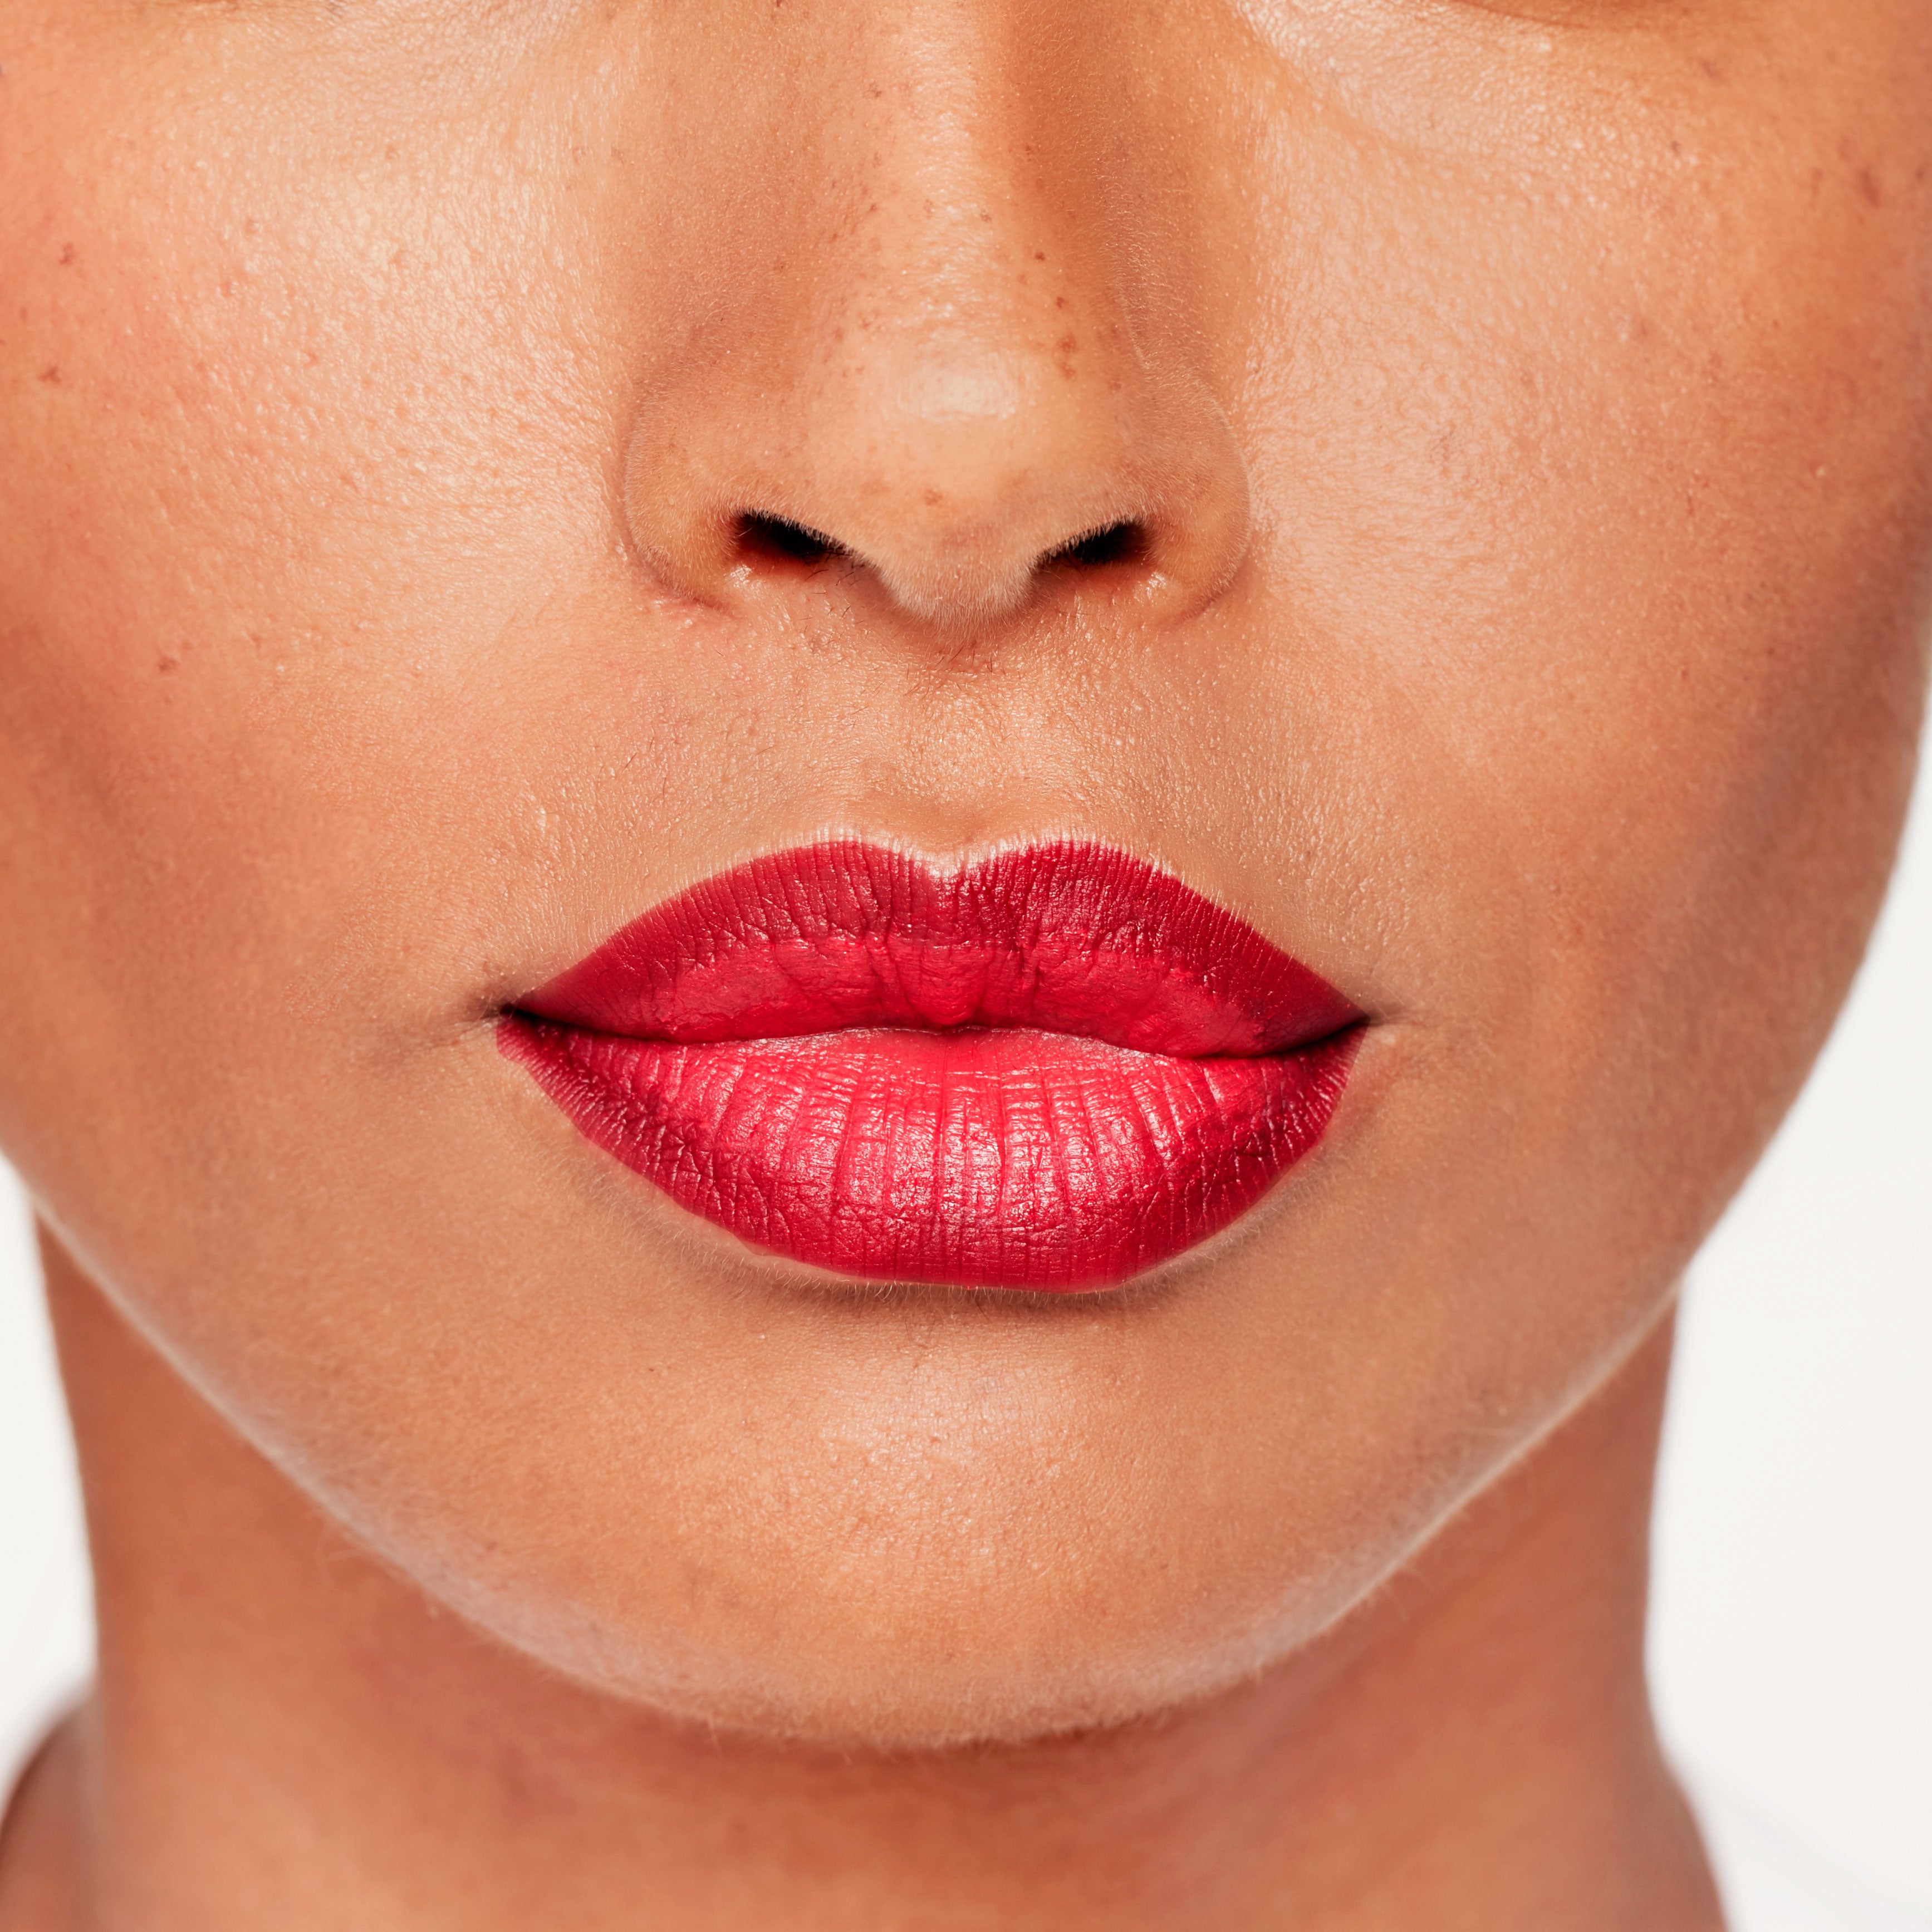 Learn How To Contour Your Eyes and Lips With Our Step by Step Guide
